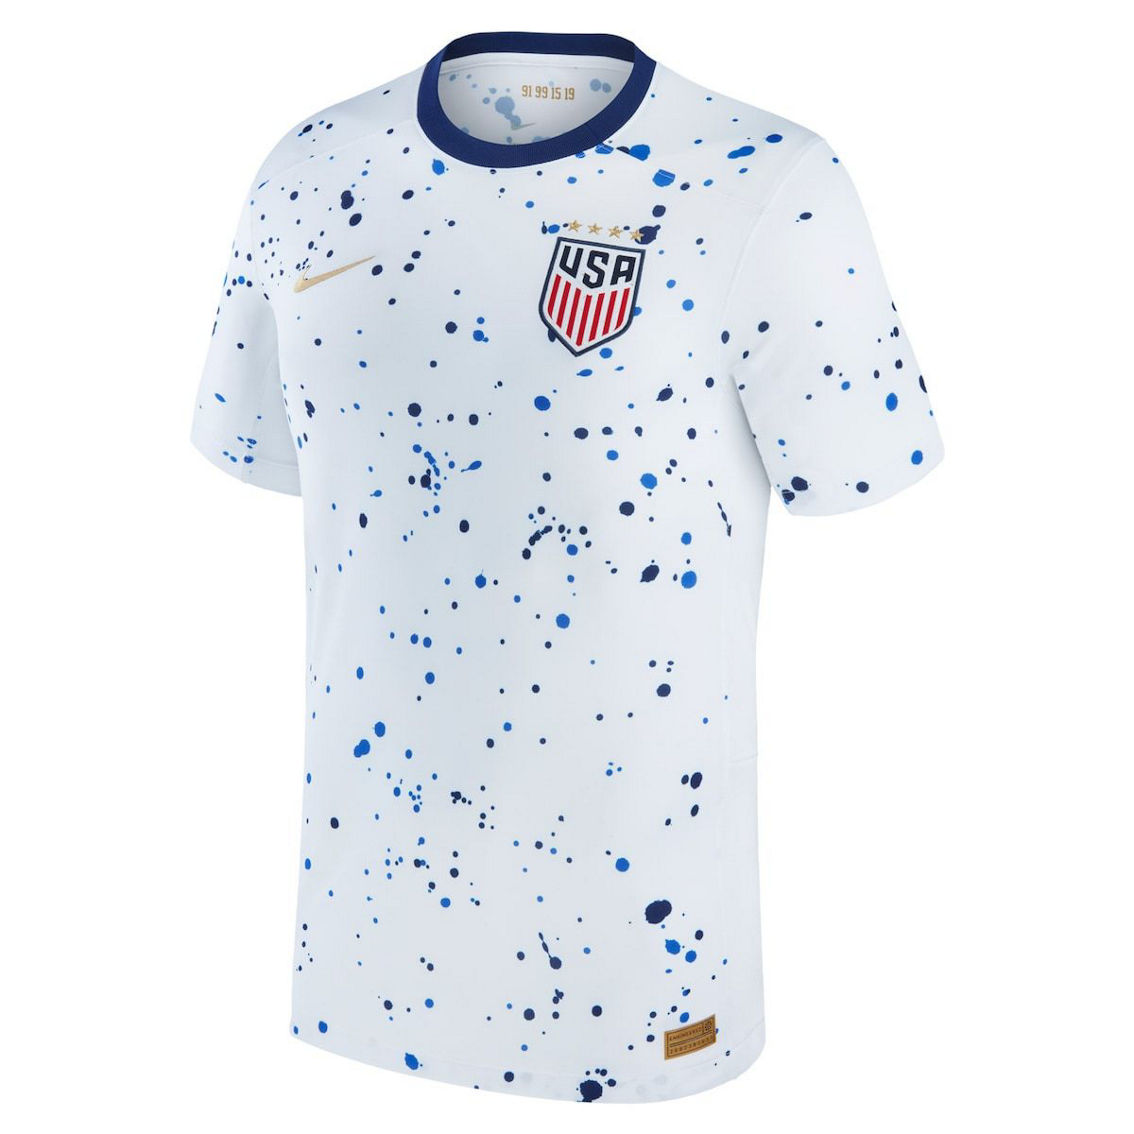 Nike Men's White USWNT 2023 Home Replica Jersey - Image 3 of 4